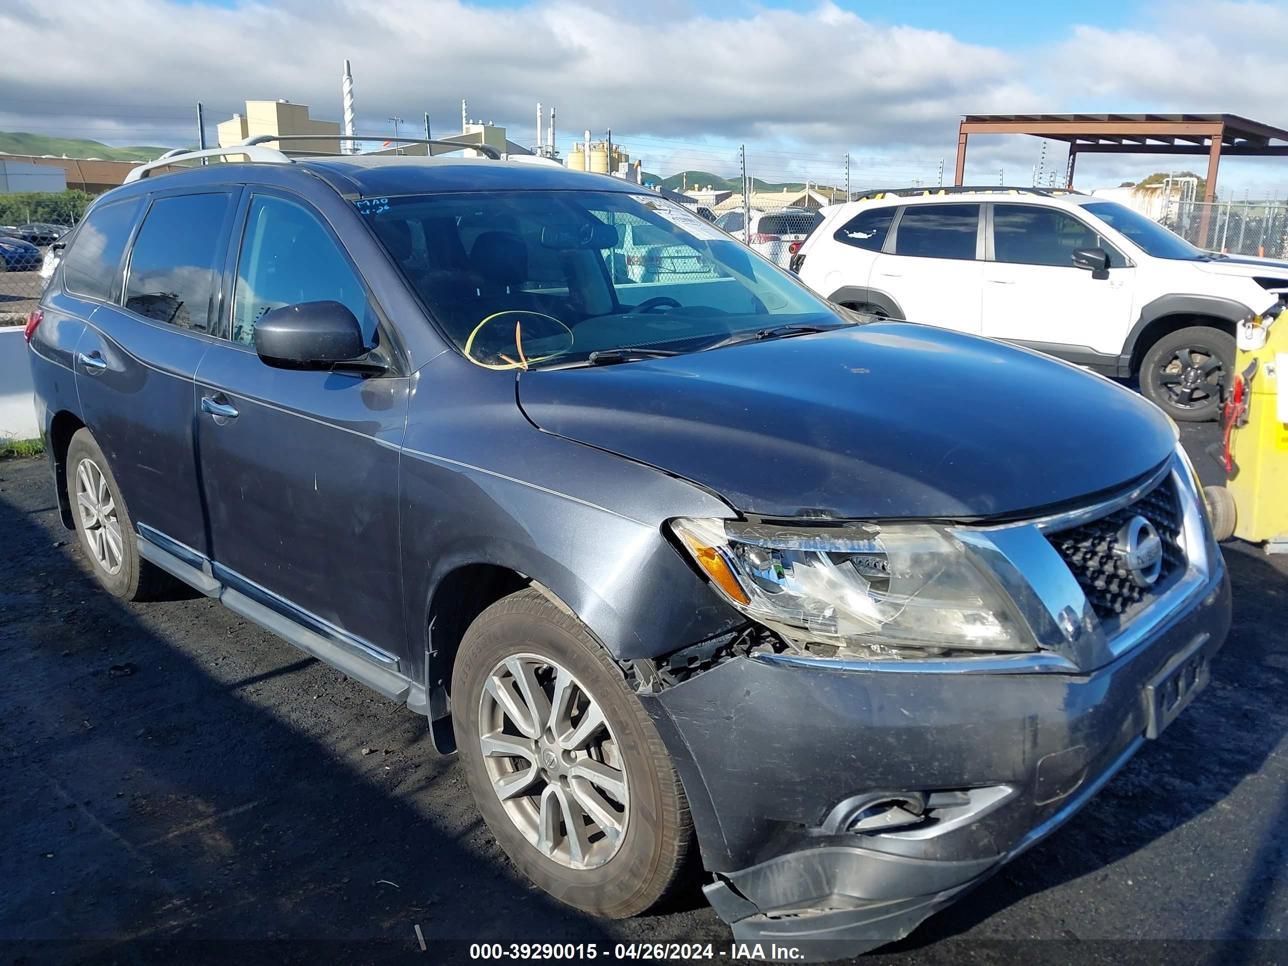 vin: 5N1AR2MN8EC682882 5N1AR2MN8EC682882 2014 nissan pathfinder 3500 for Sale in 94565, 2780 Willow Pass Road, Bay Point, California, USA